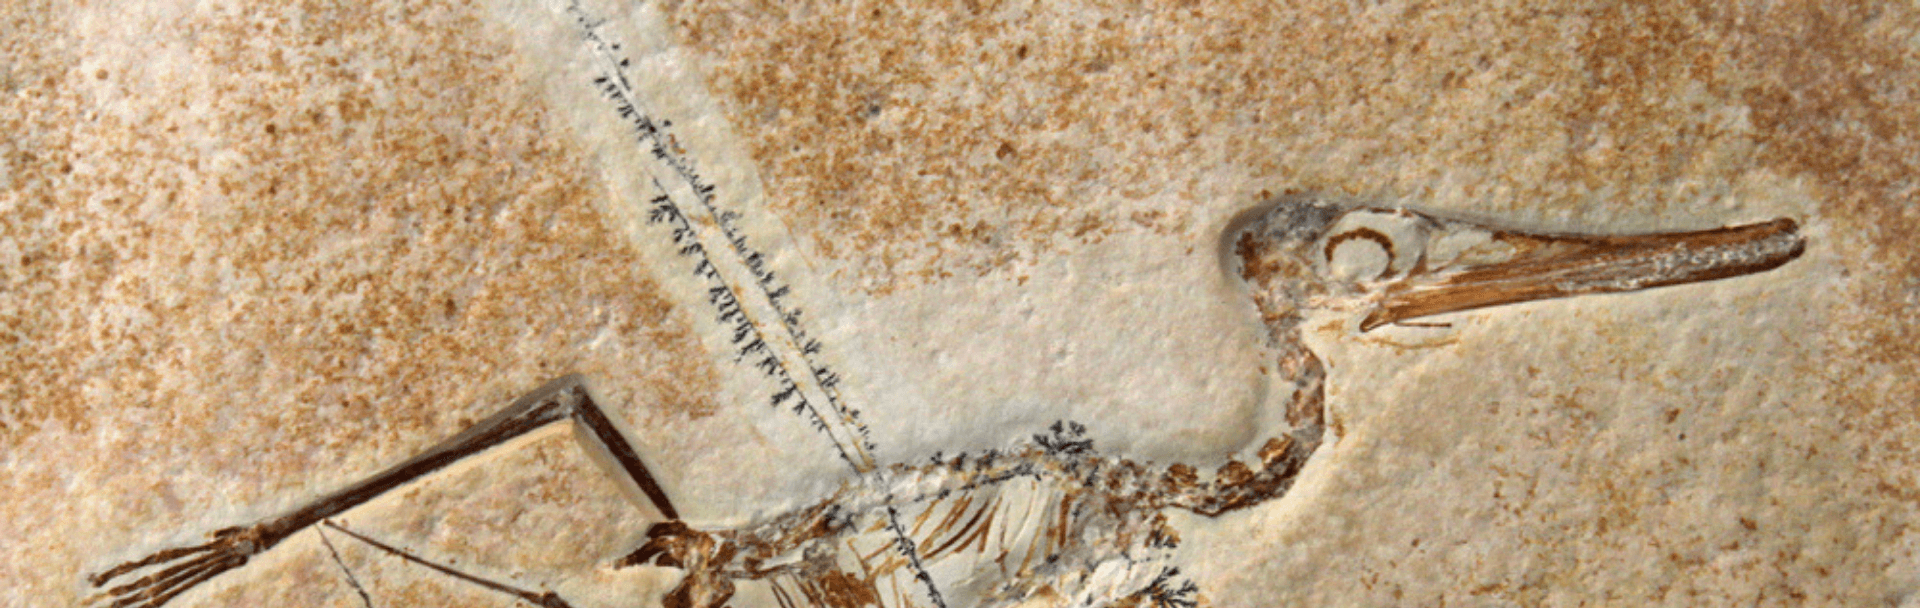 A archaeopteryx fossil in stone